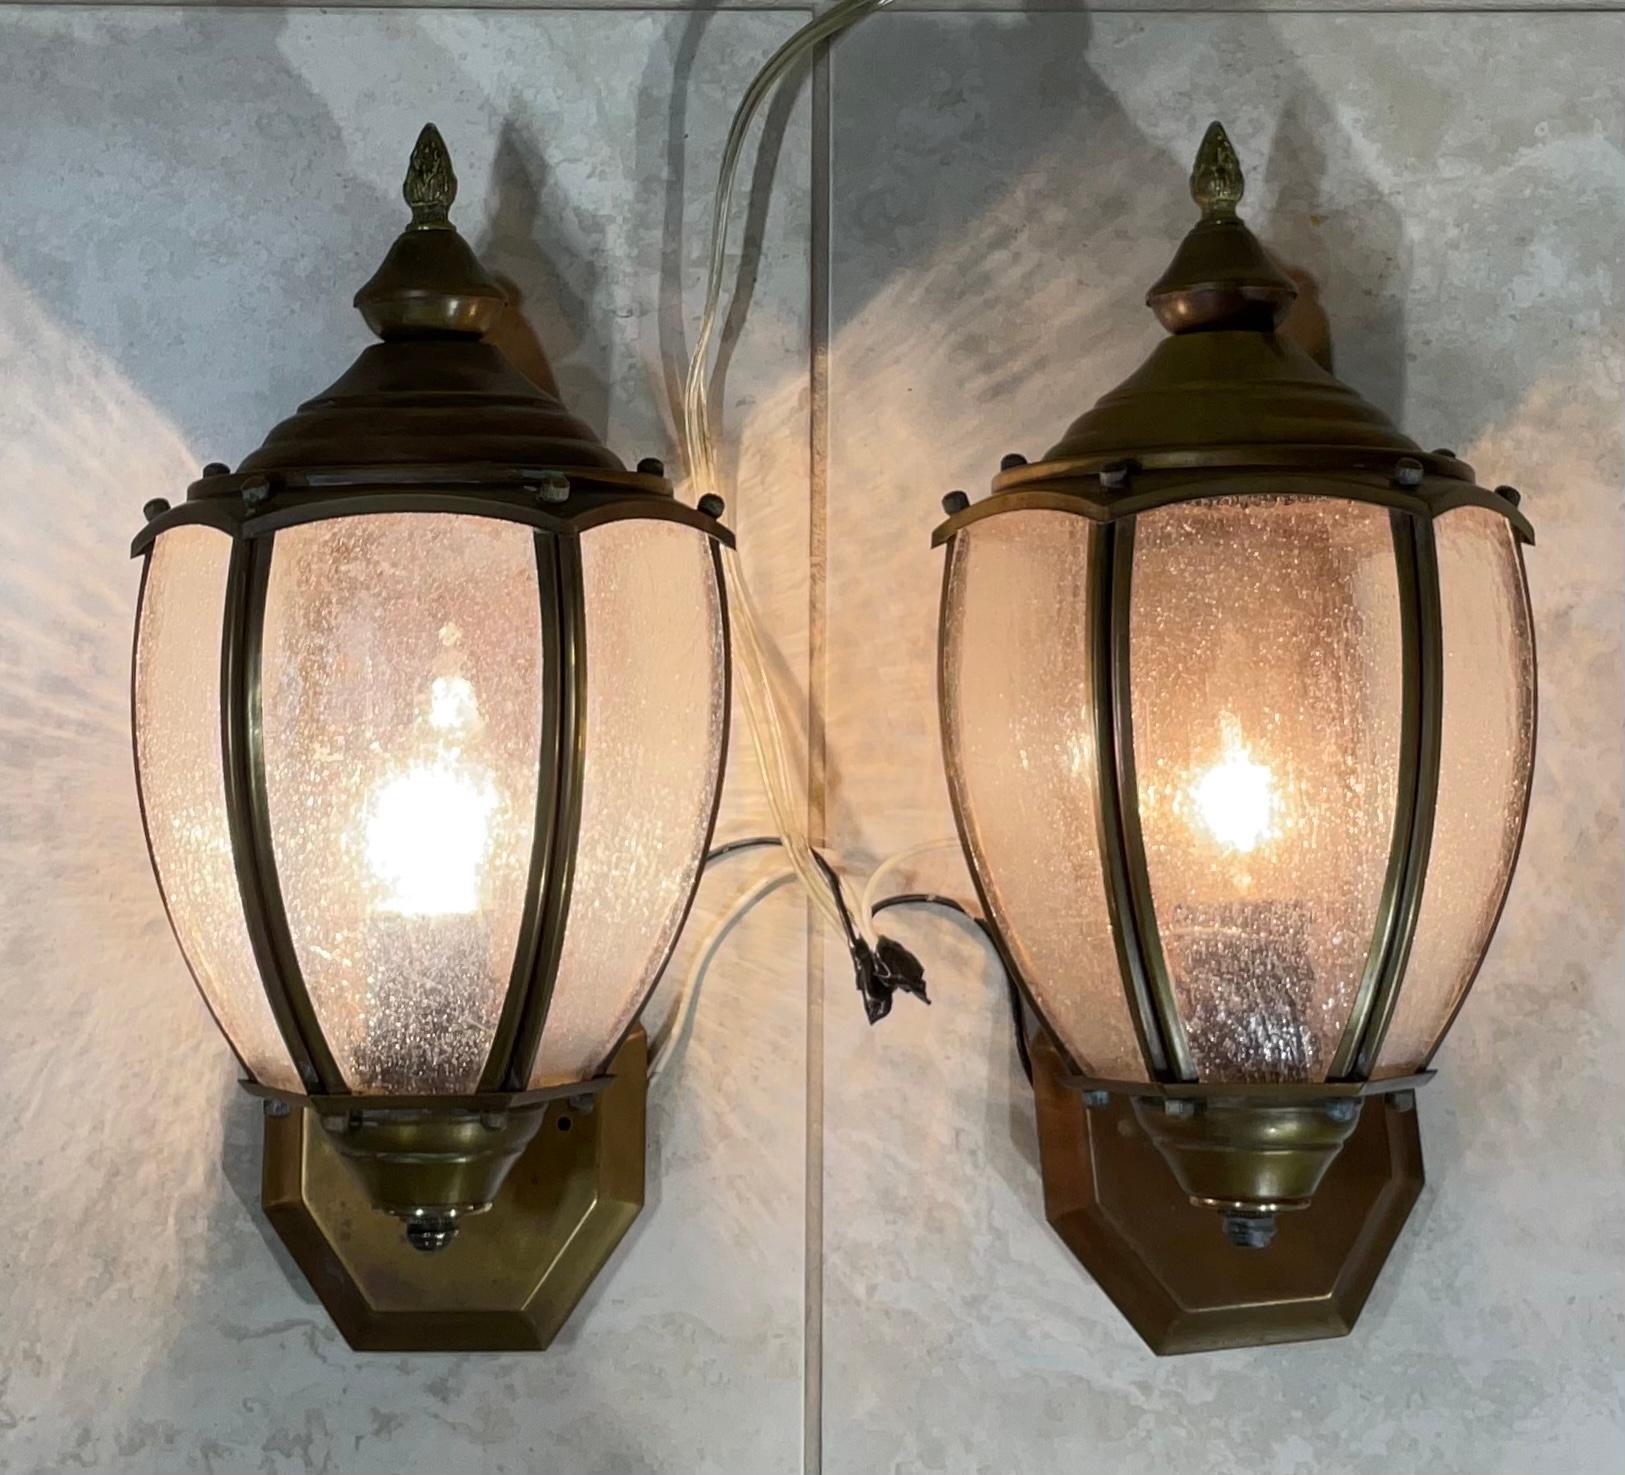 Elegant pair of vintage wall lantern hand crafted from brass with one 60/watt light each. Acrylic glass like . Suitable for wet location .
Beautiful decorative pair of lantern indoor or outdoor.
 Backplate size is “5”.5 high x 4”.75 wide